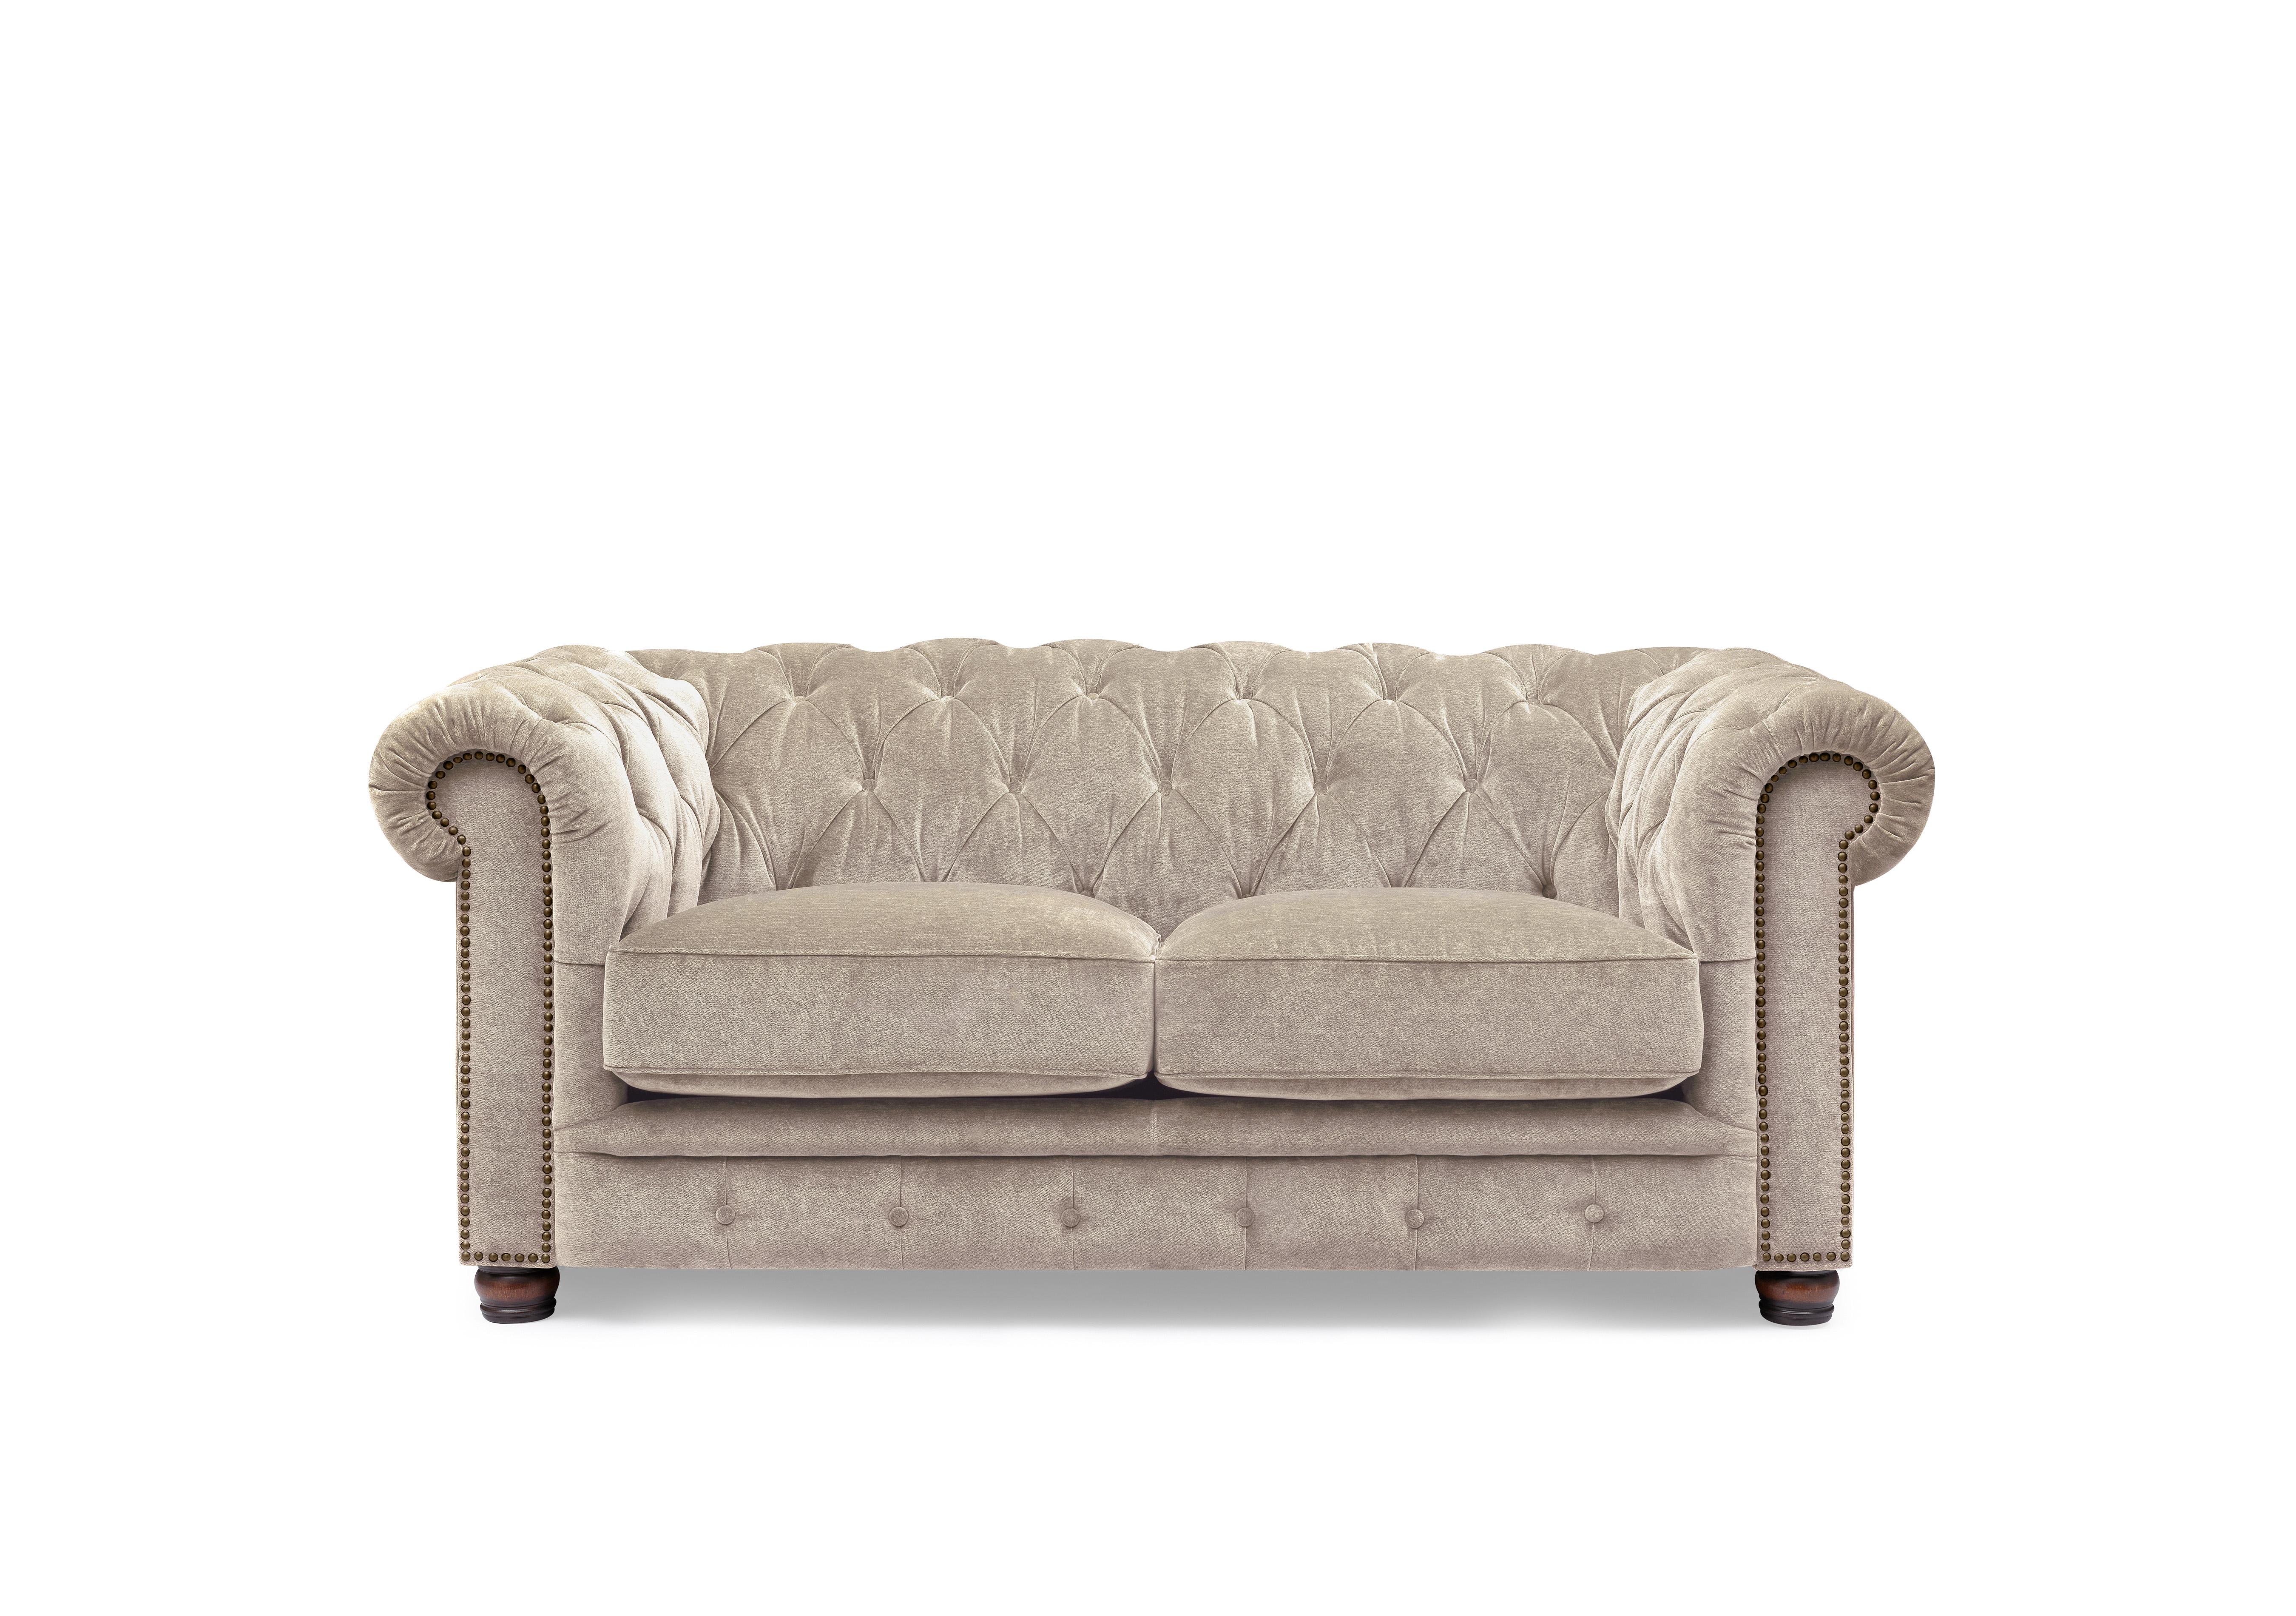 Shackleton 2 Seater Fabric Chesterfield Sofa in X3y1-W022 Barley on Furniture Village